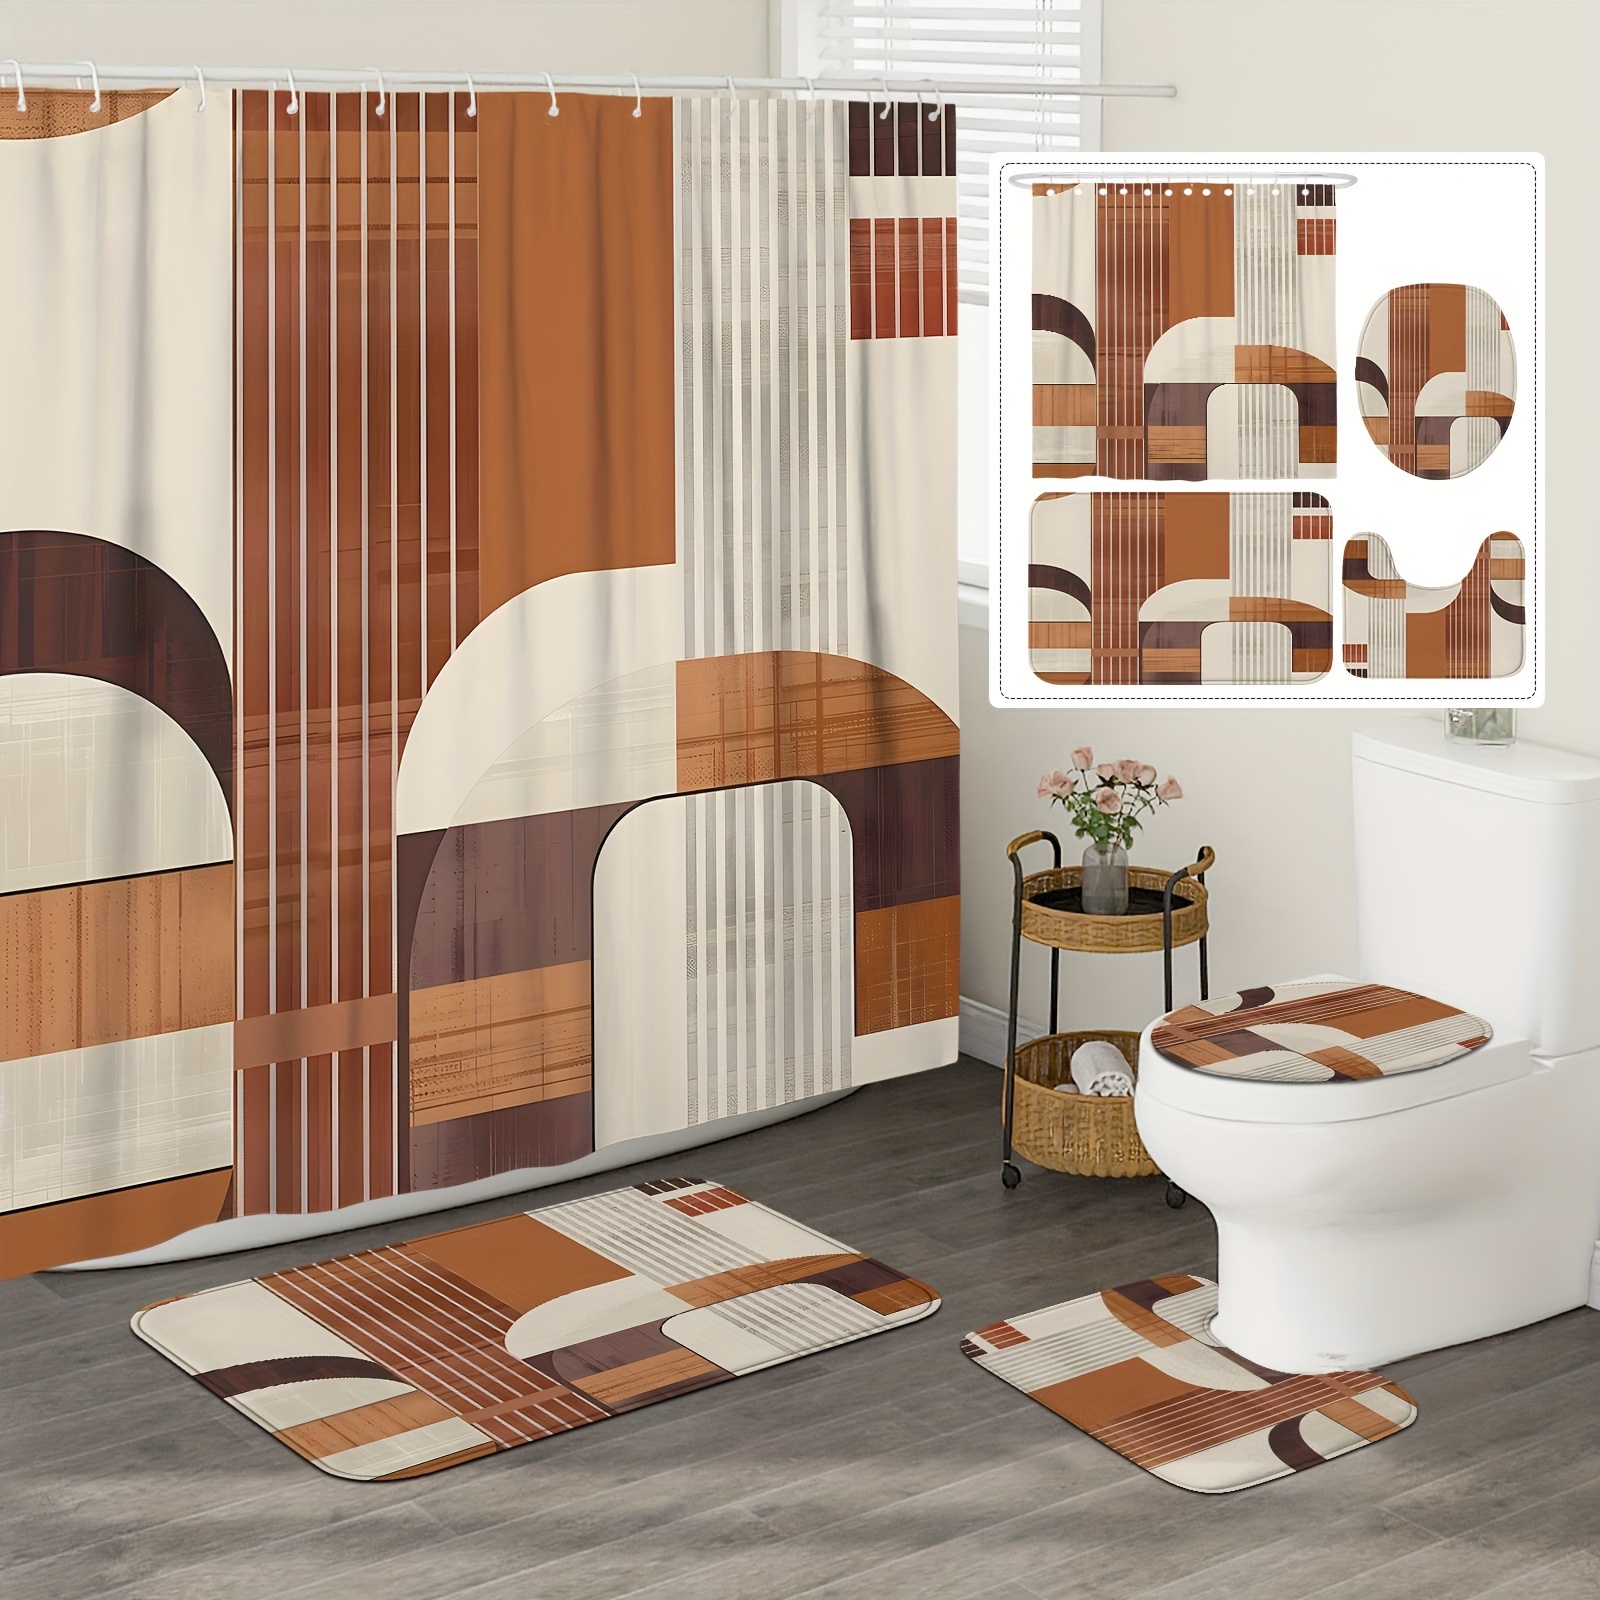 

Bohemian Geometric Shower Curtain Set: 71" X 71" Polyester Curtain With 12 Hooks, Brown, White, And Beige Bath Mat, U-shaped Toilet Mat, And Lid Cover - Machine Washable, Waterproof, And Seasonal